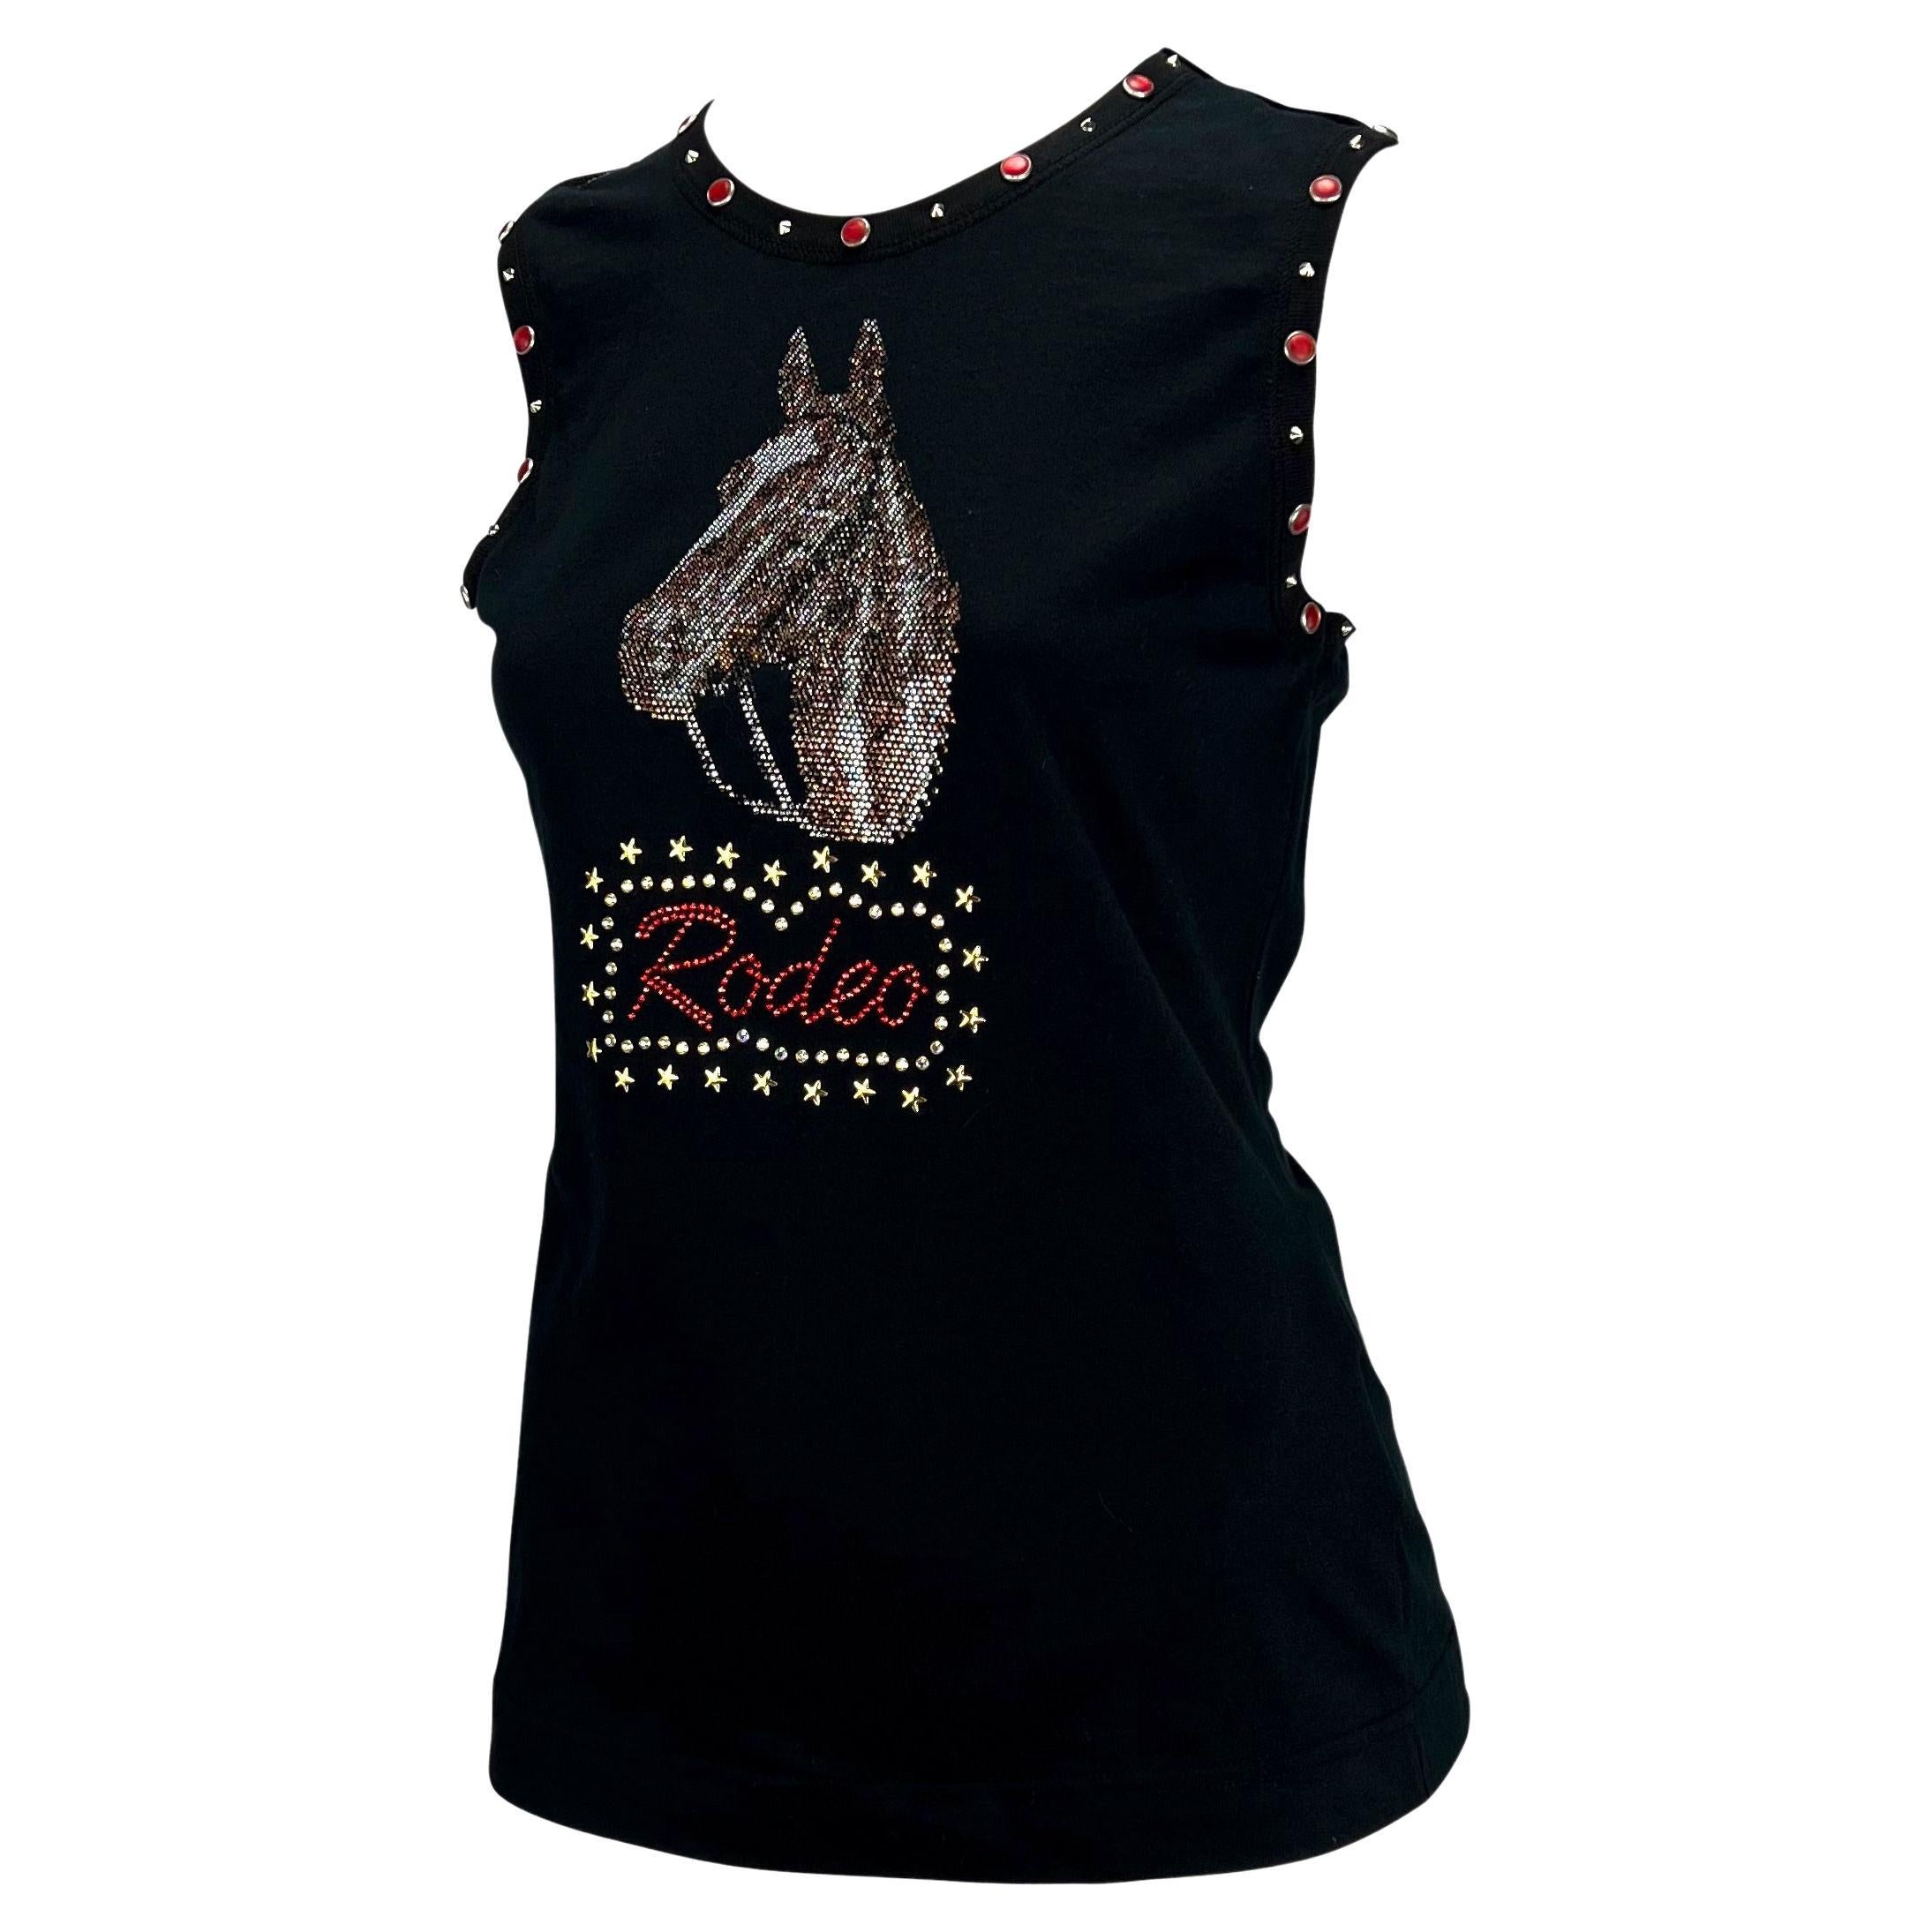 TheRealList presents: a fabulous western-inspired Dolce and Gabbana rhinestoned and studded sleeveless shirt. From the early 2000s, this black top with a horse head and 'Rodeo' created from multicolored rhinestones is peak Y2K style. The top is made